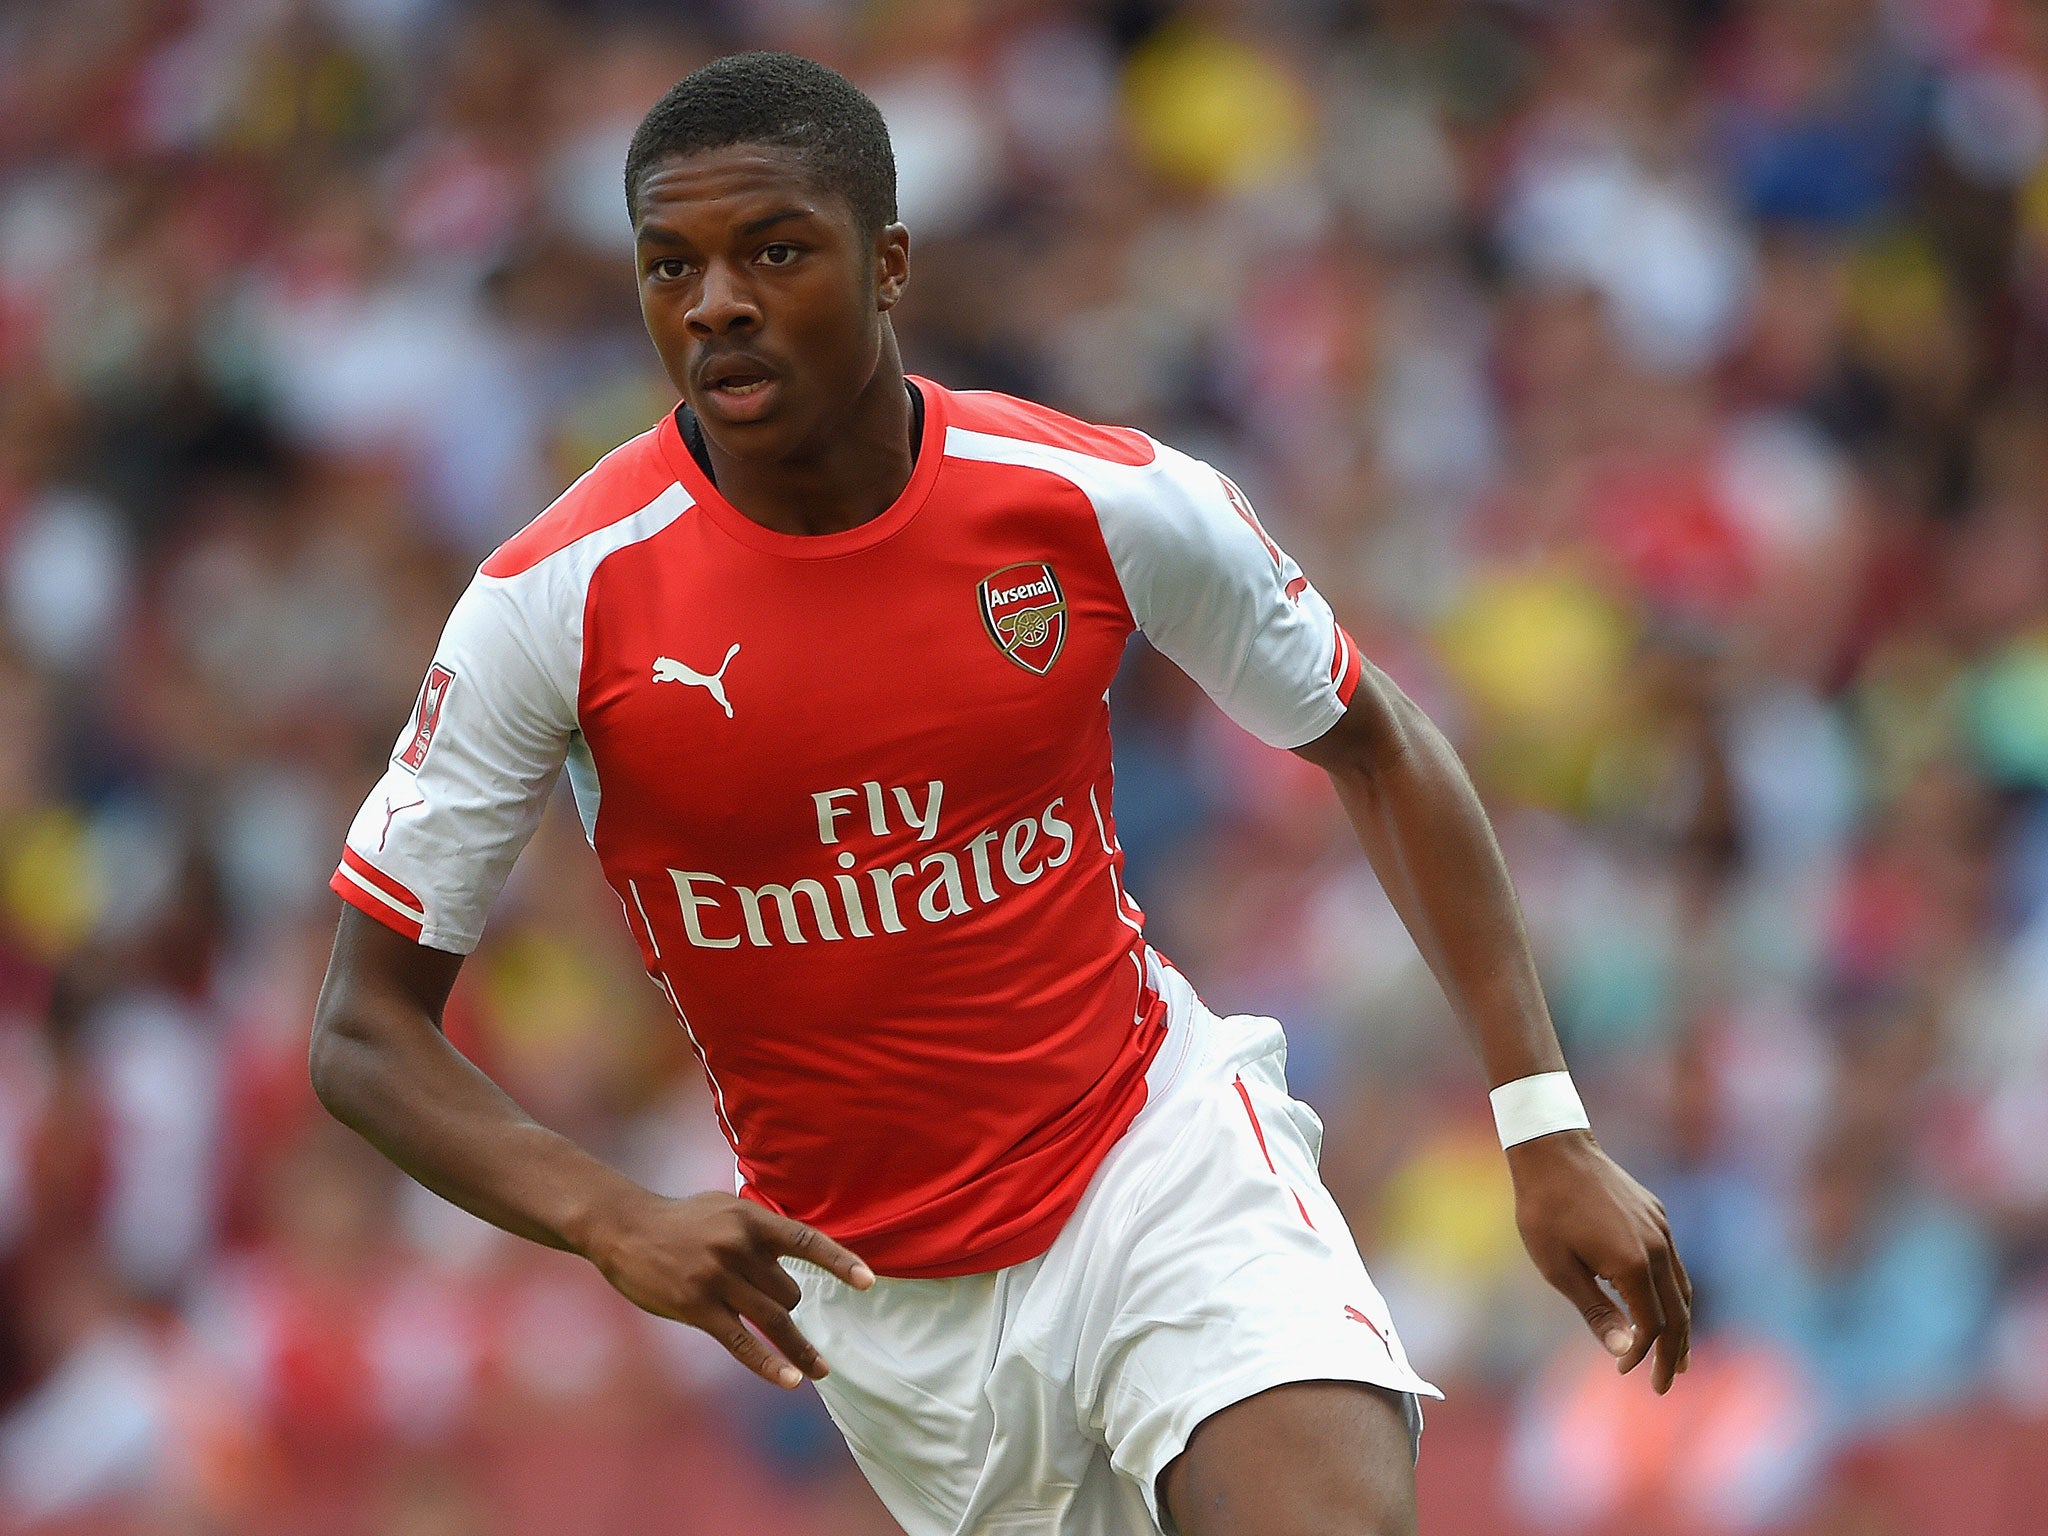 Chuba Akpom is out of contract with Arsenal at the end of the season